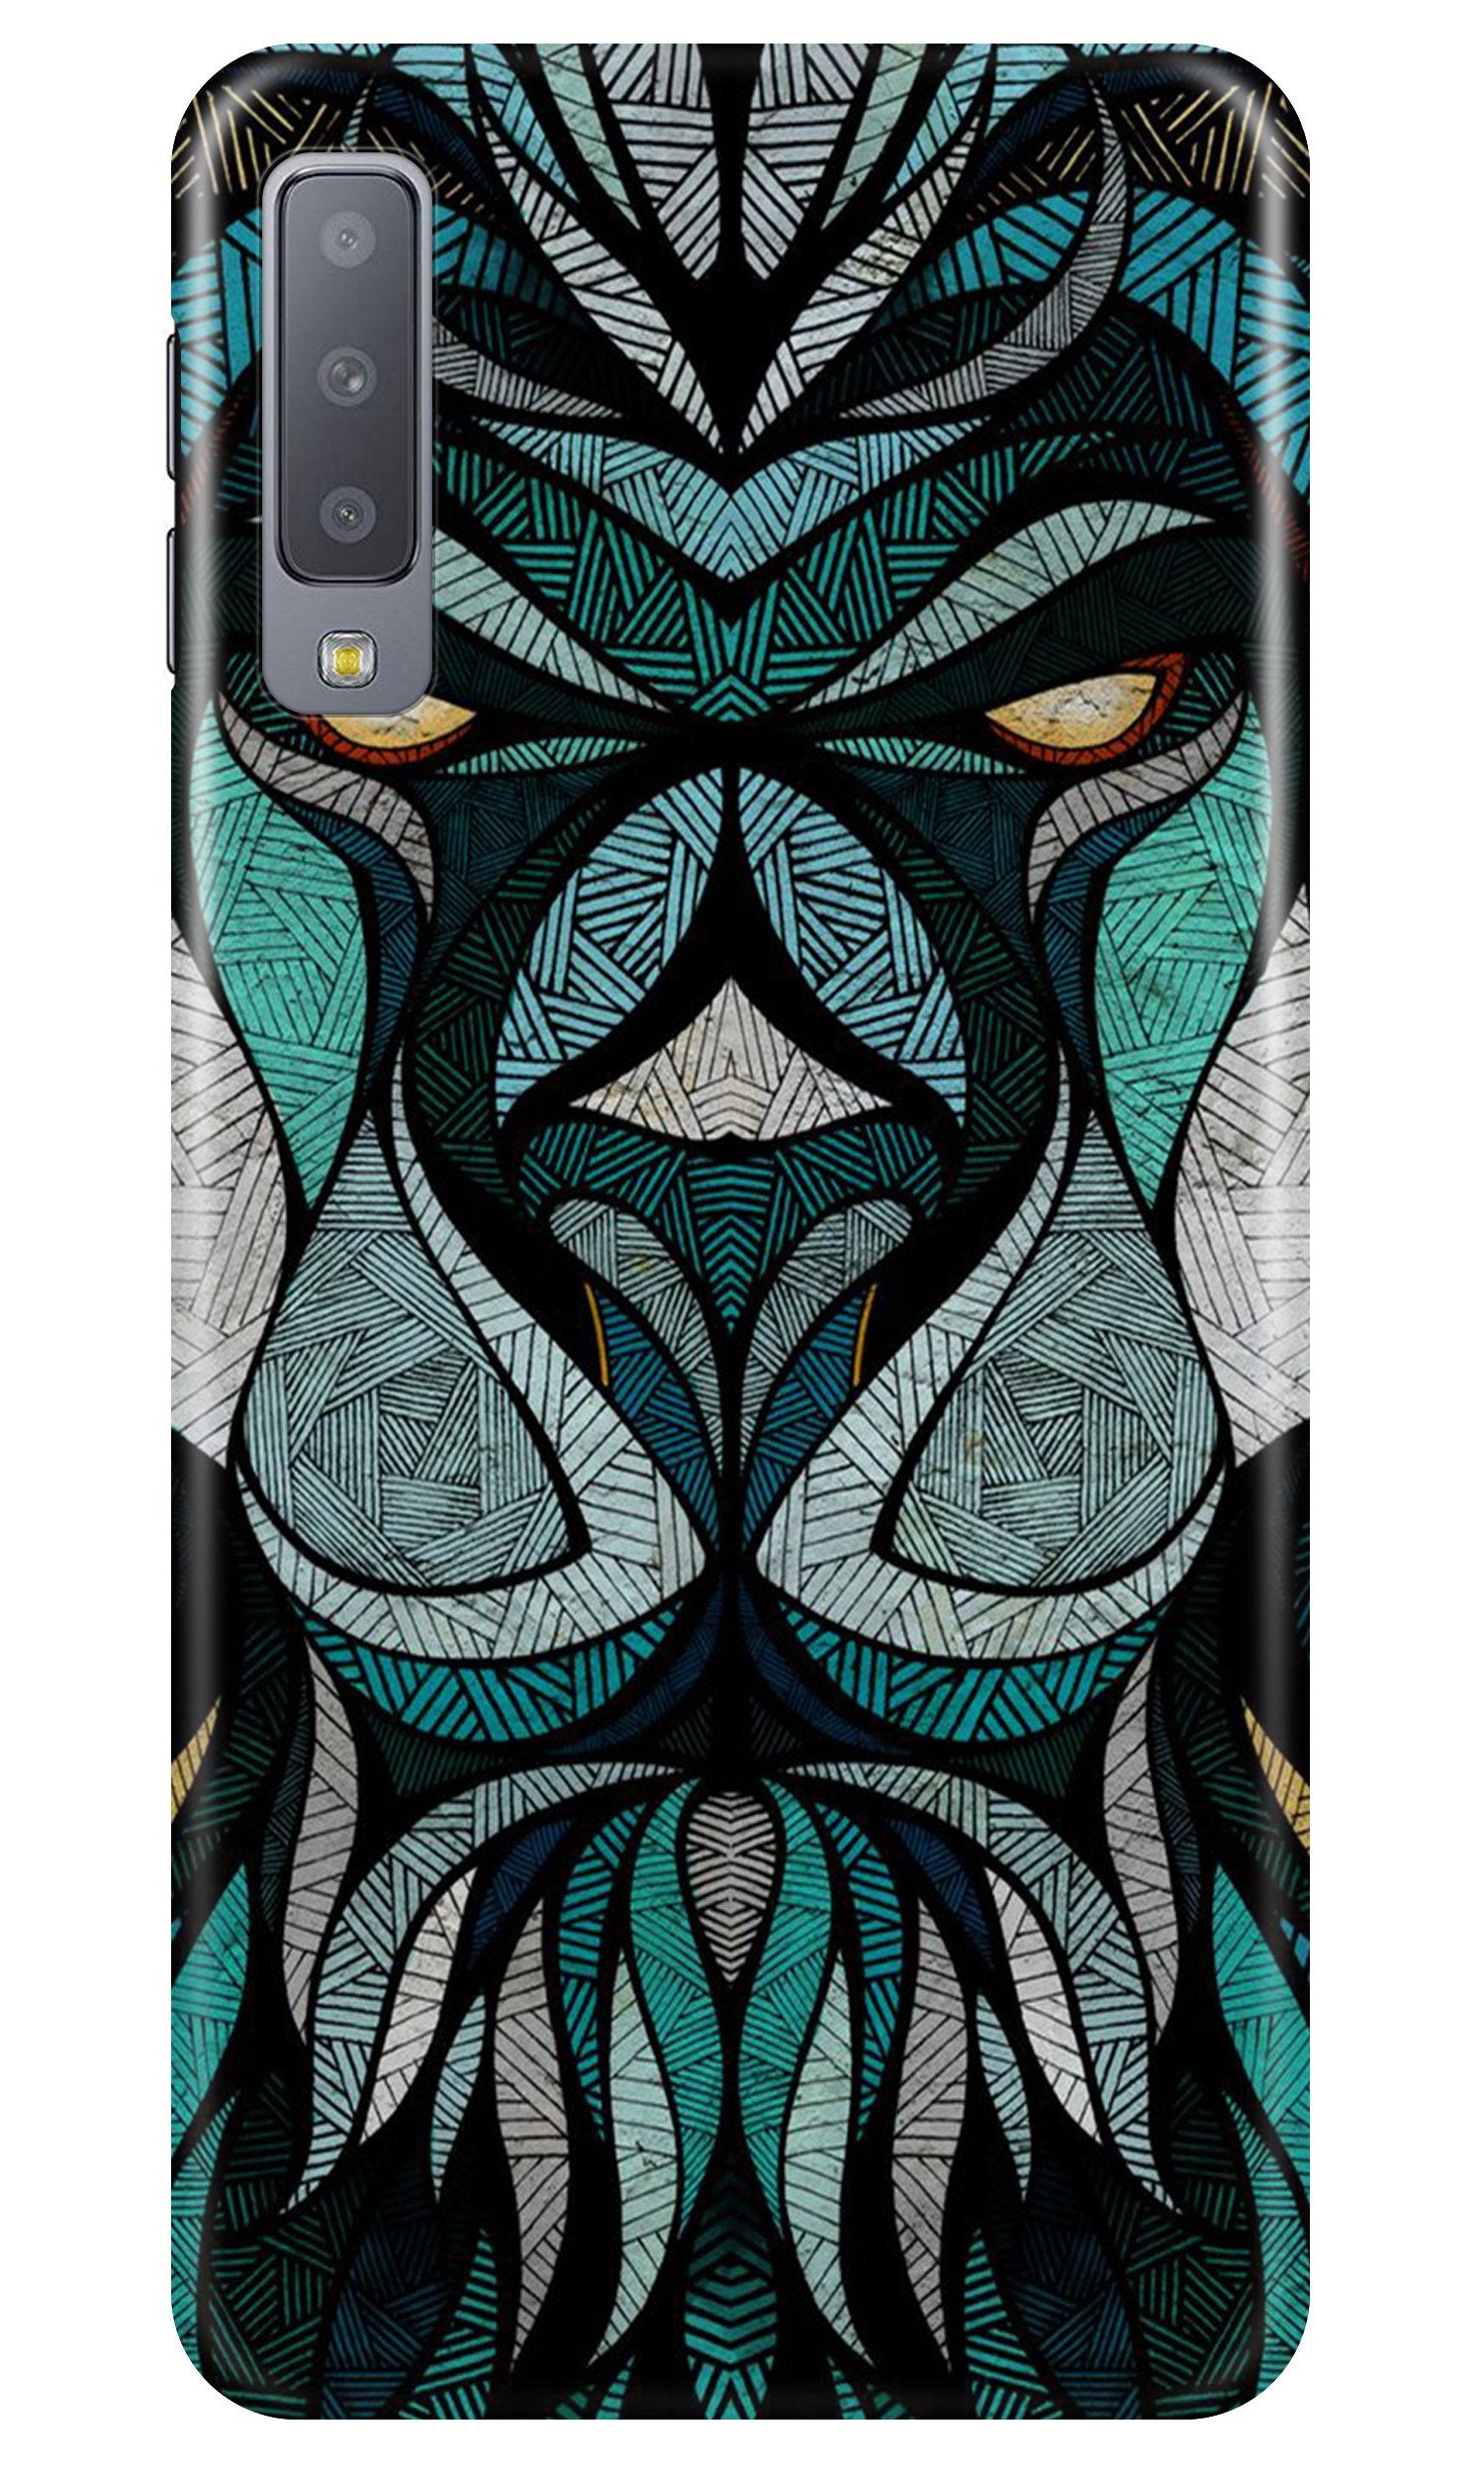 Lion Case for Galaxy A7 (2018)